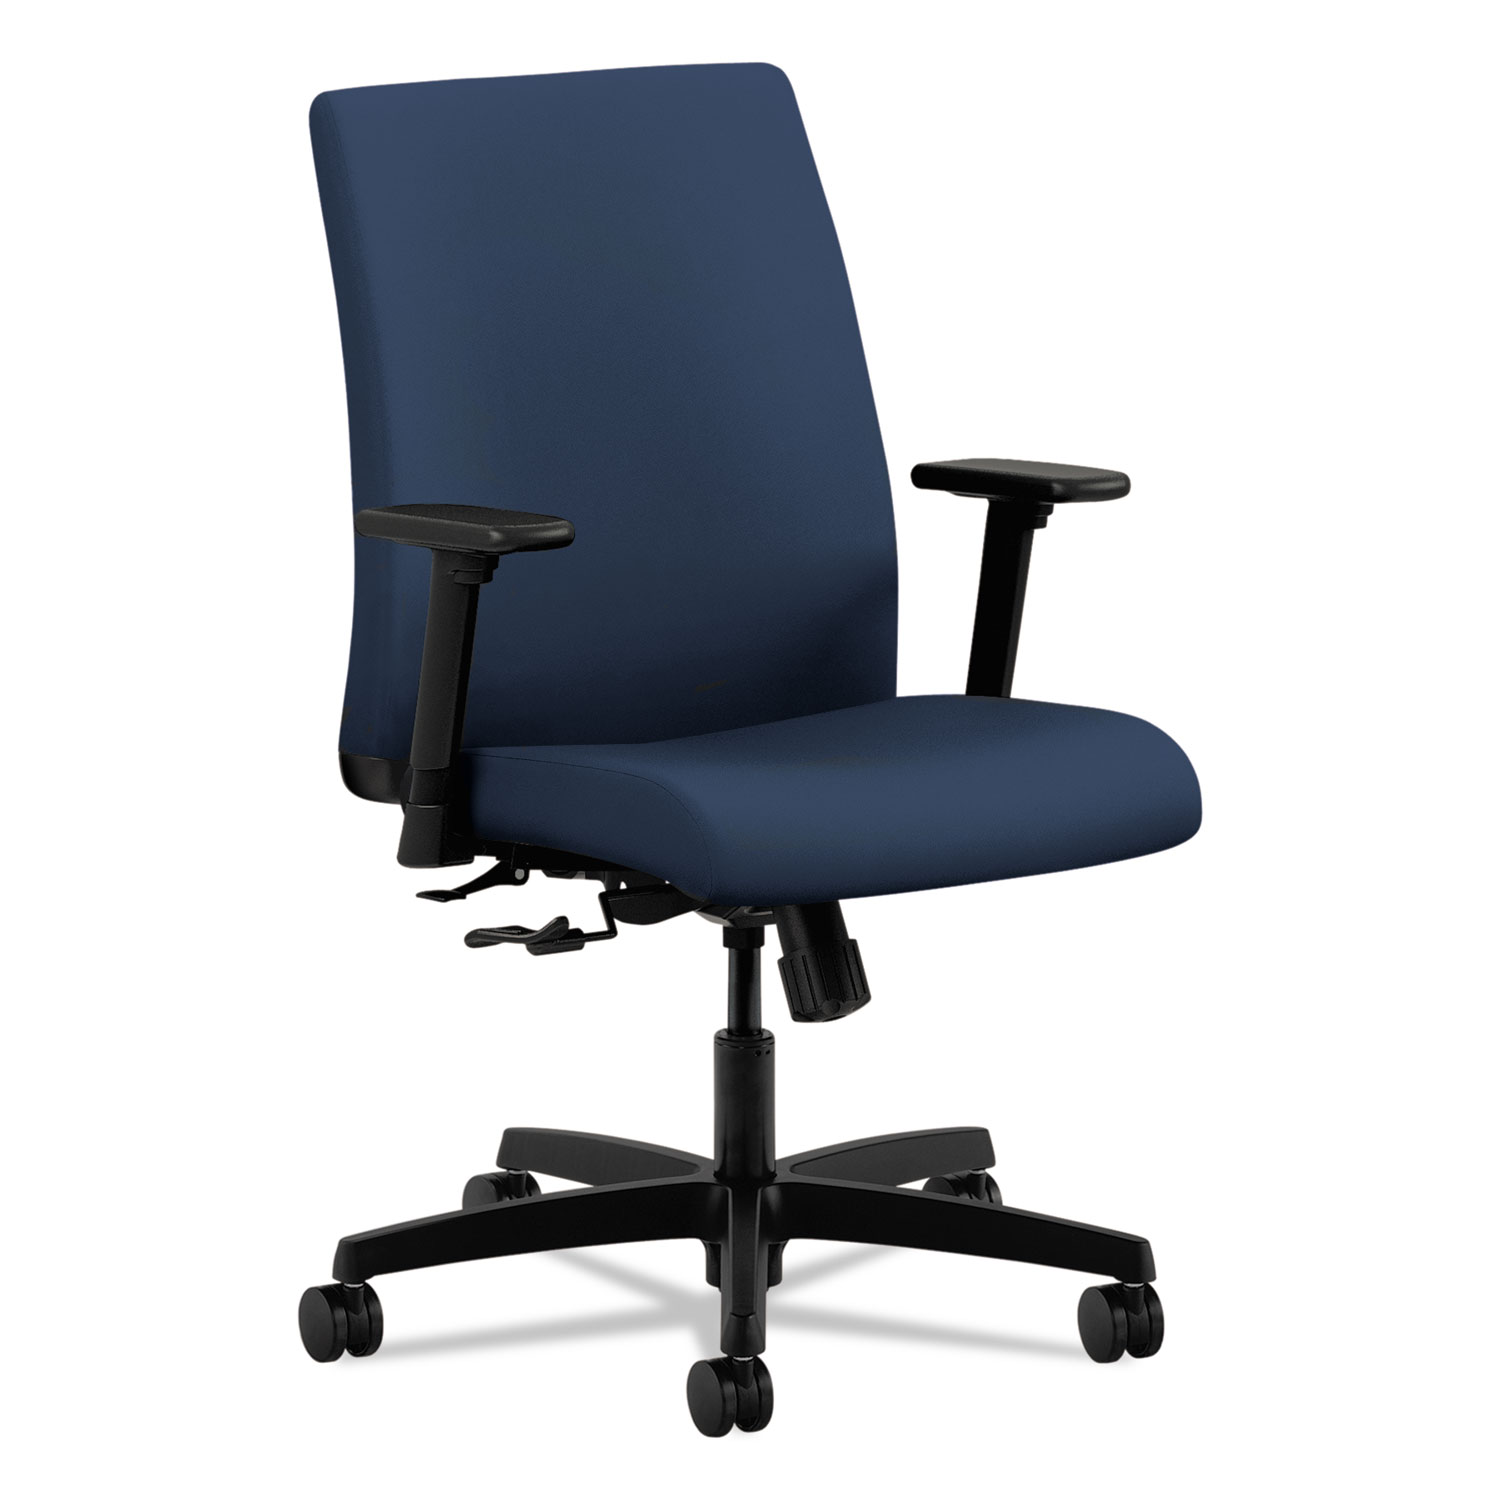  HON HITL1.A.H.U.CU98.T.SB Ignition Series Fabric Low-Back Task Chair, Supports up to 300 lbs., Navy Seat/Navy Back, Black Base (HONIT105CU98) 